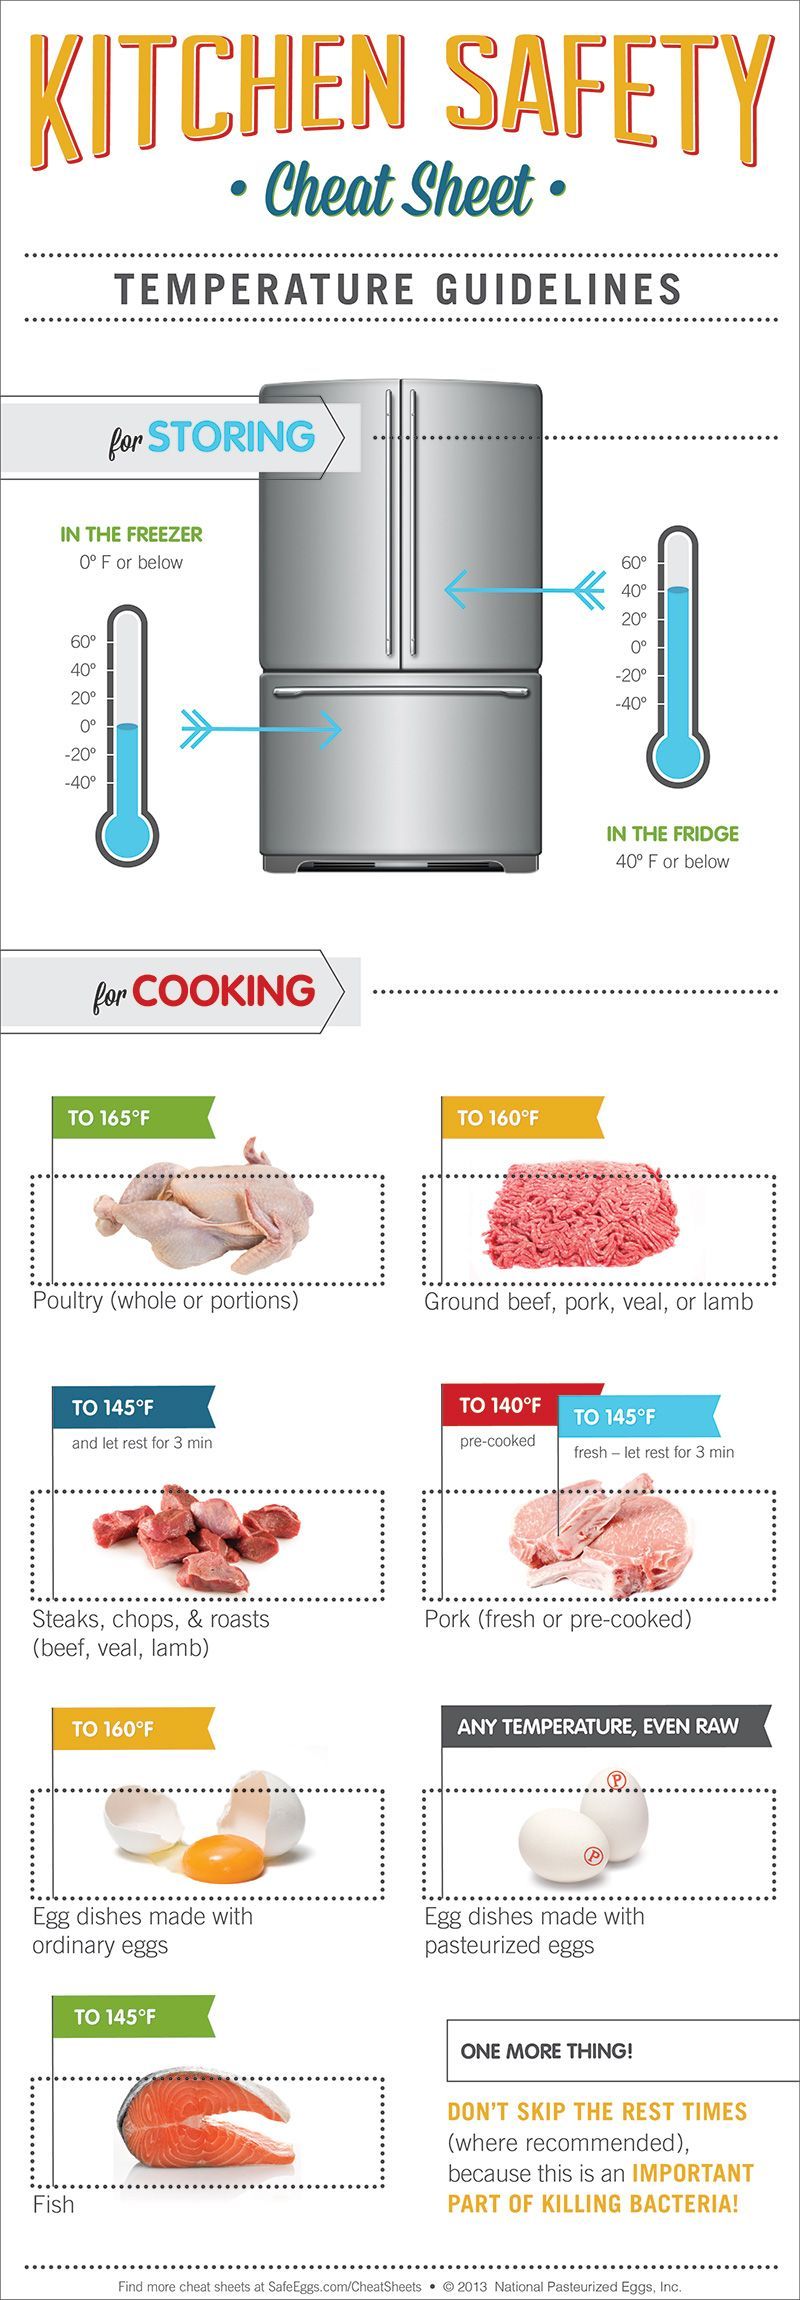 Food temperature guidelines for storing and cooking – SafeEggs.com